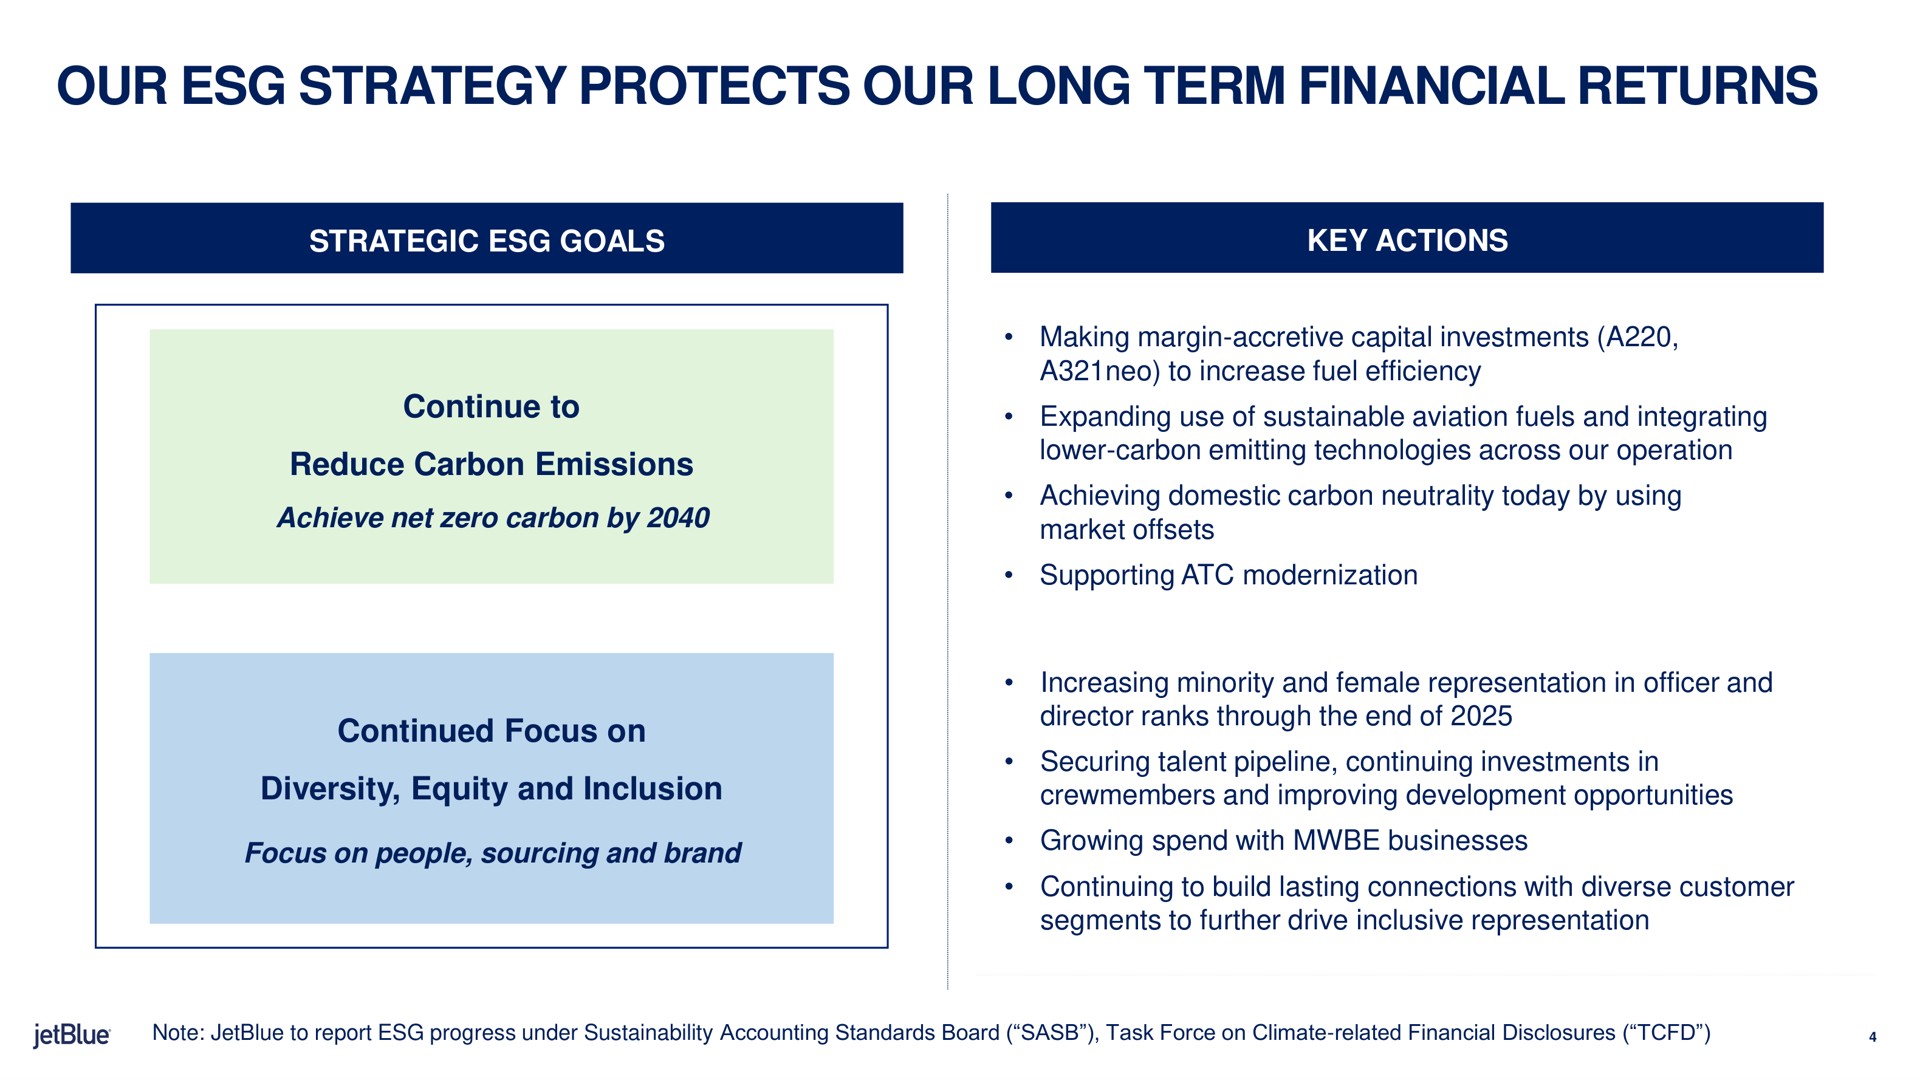 our strategy protects our long term financial returns continue to expanding use of sustainable aviation fuels and integrating | jetBlue